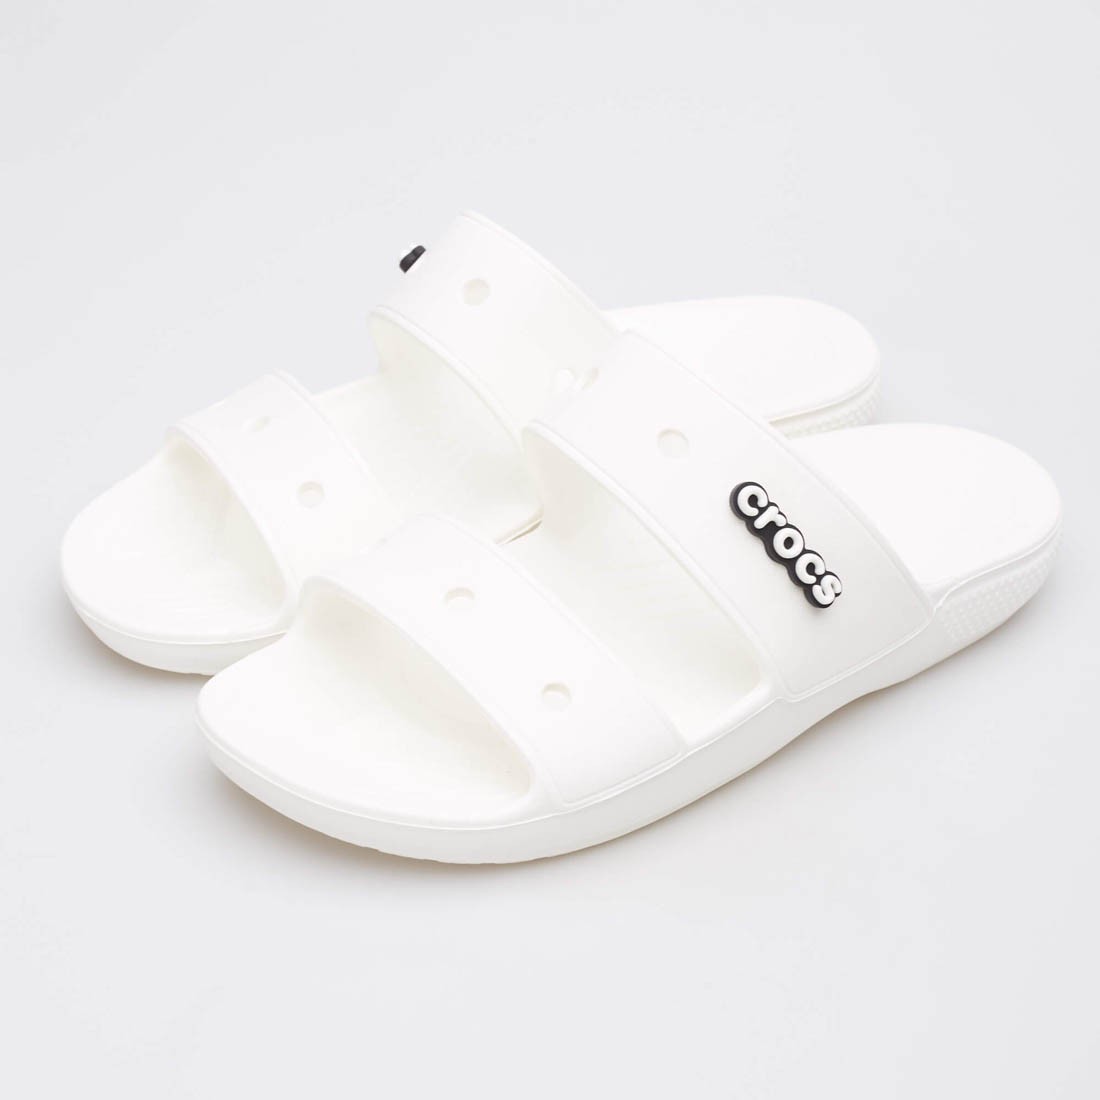 Shop Crocs Classic White Sandal - Crocs, delivered to your home | TheOutfit